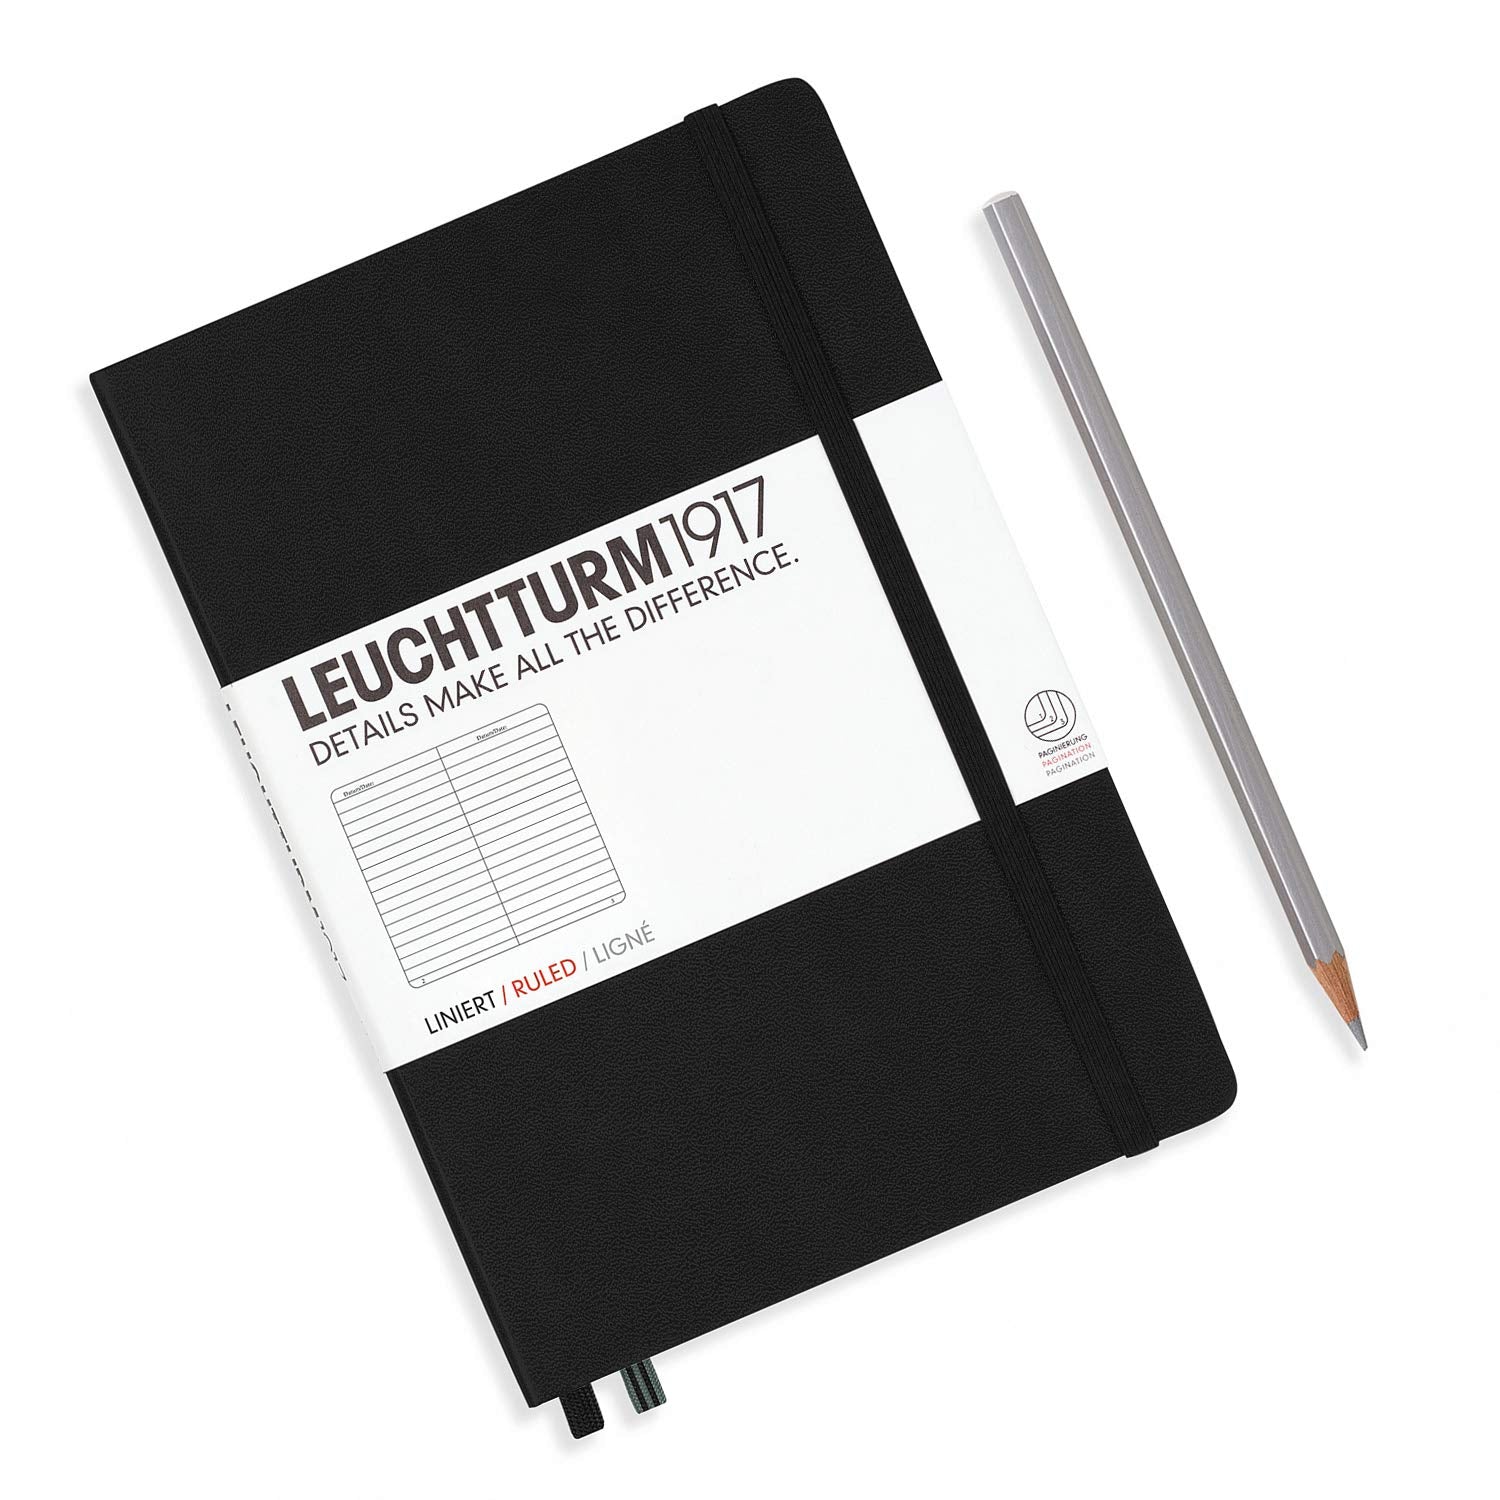 Leuchtturm1917 Medium A5 Ruled Hardcover Notebook (Black) - 249 Numbered Pages